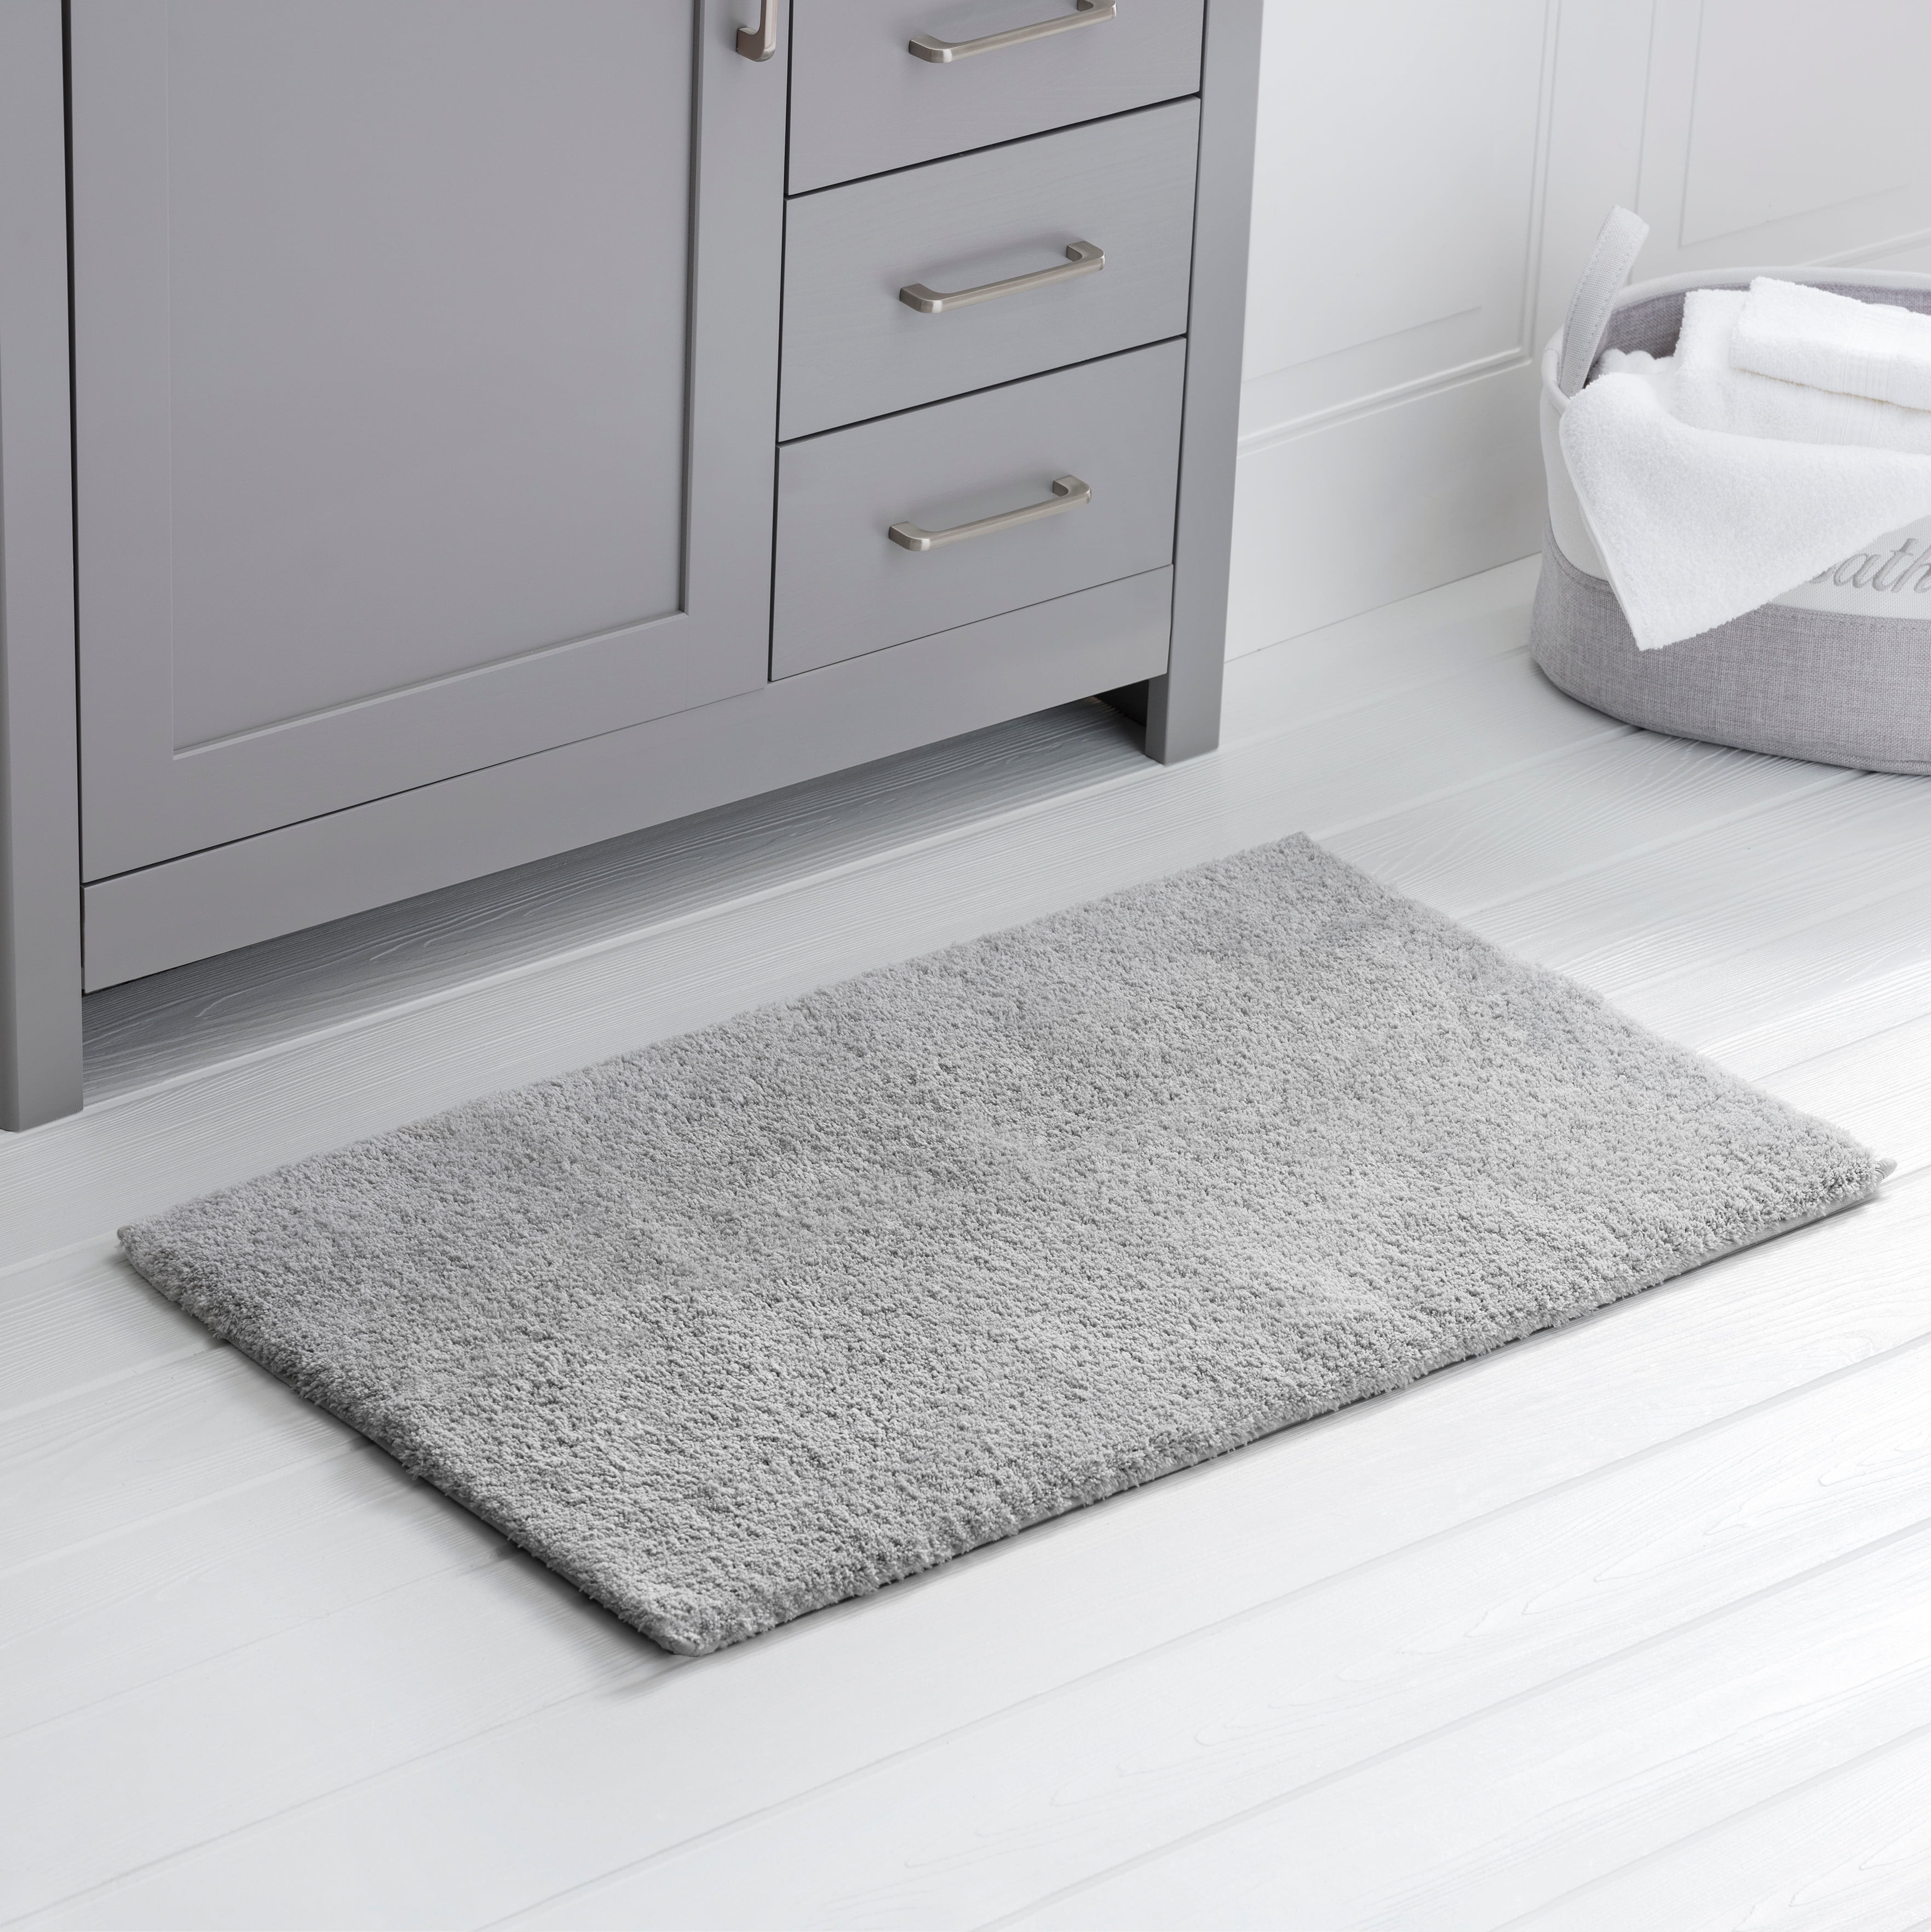 Details about  / Brand New Bathroom Mat White and Brown